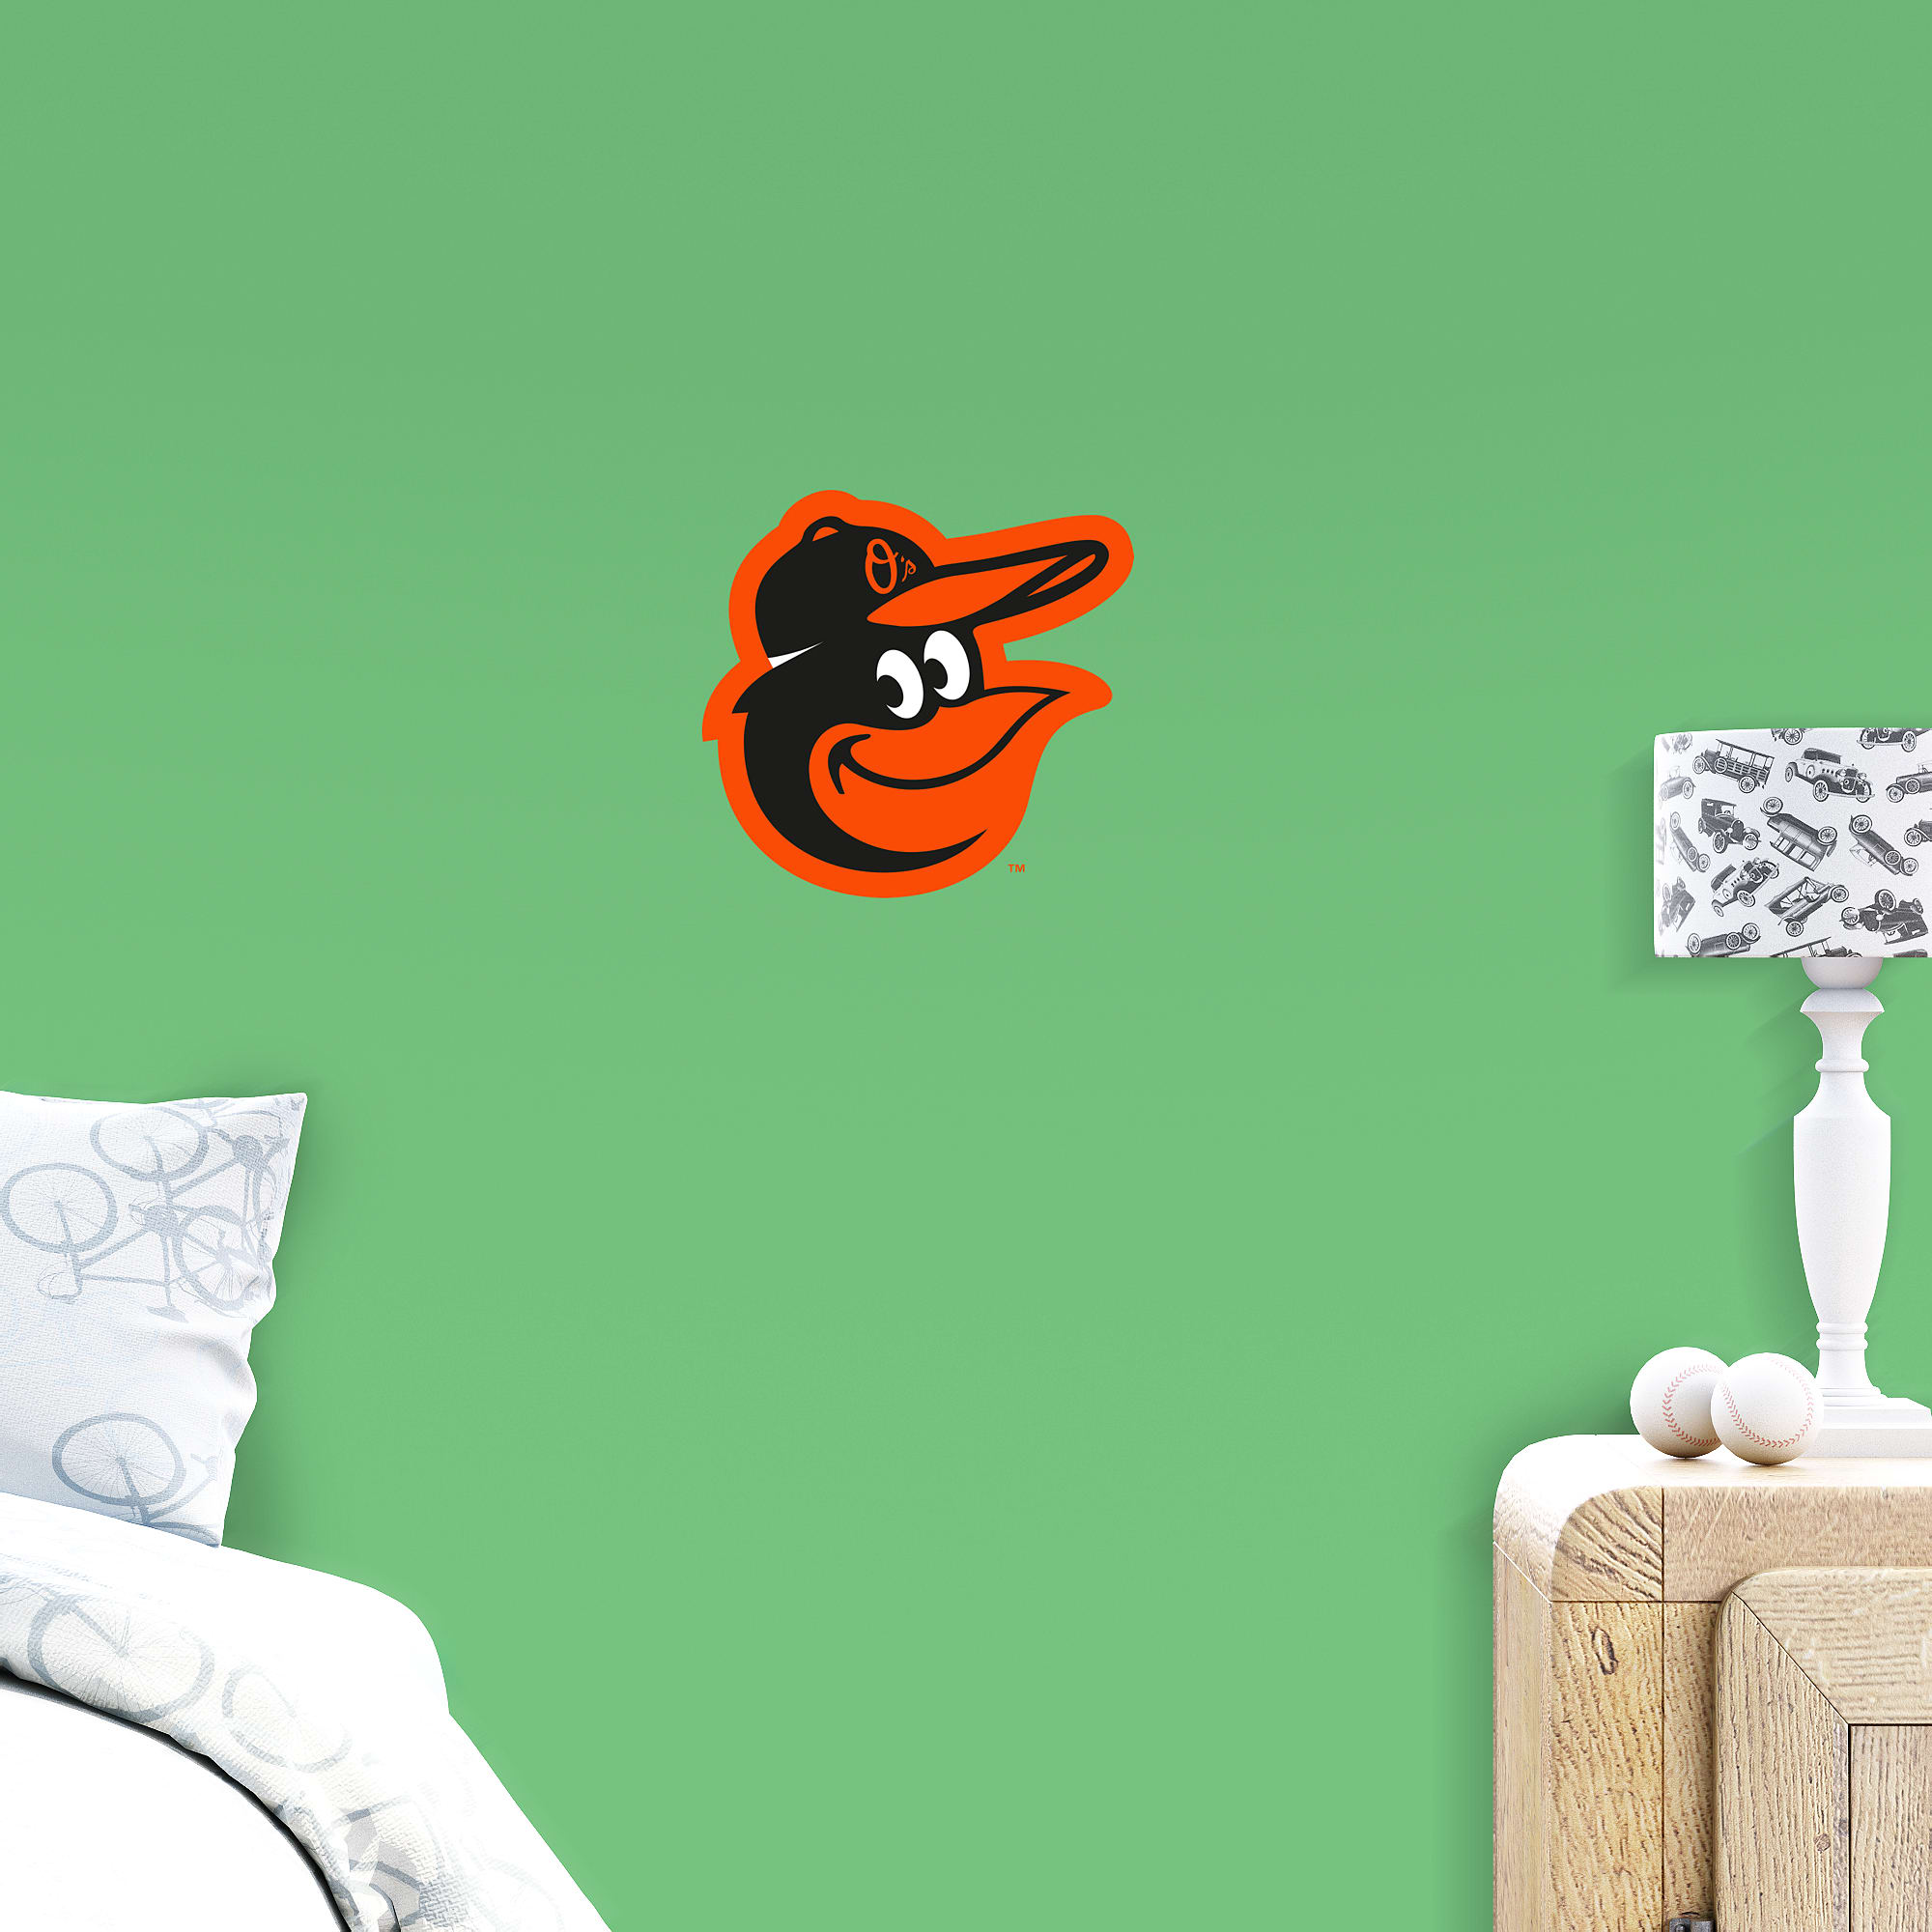 Baltimore Orioles: Alternate Logo - Officially Licensed MLB Removable Wall Decal Large by Fathead | Vinyl